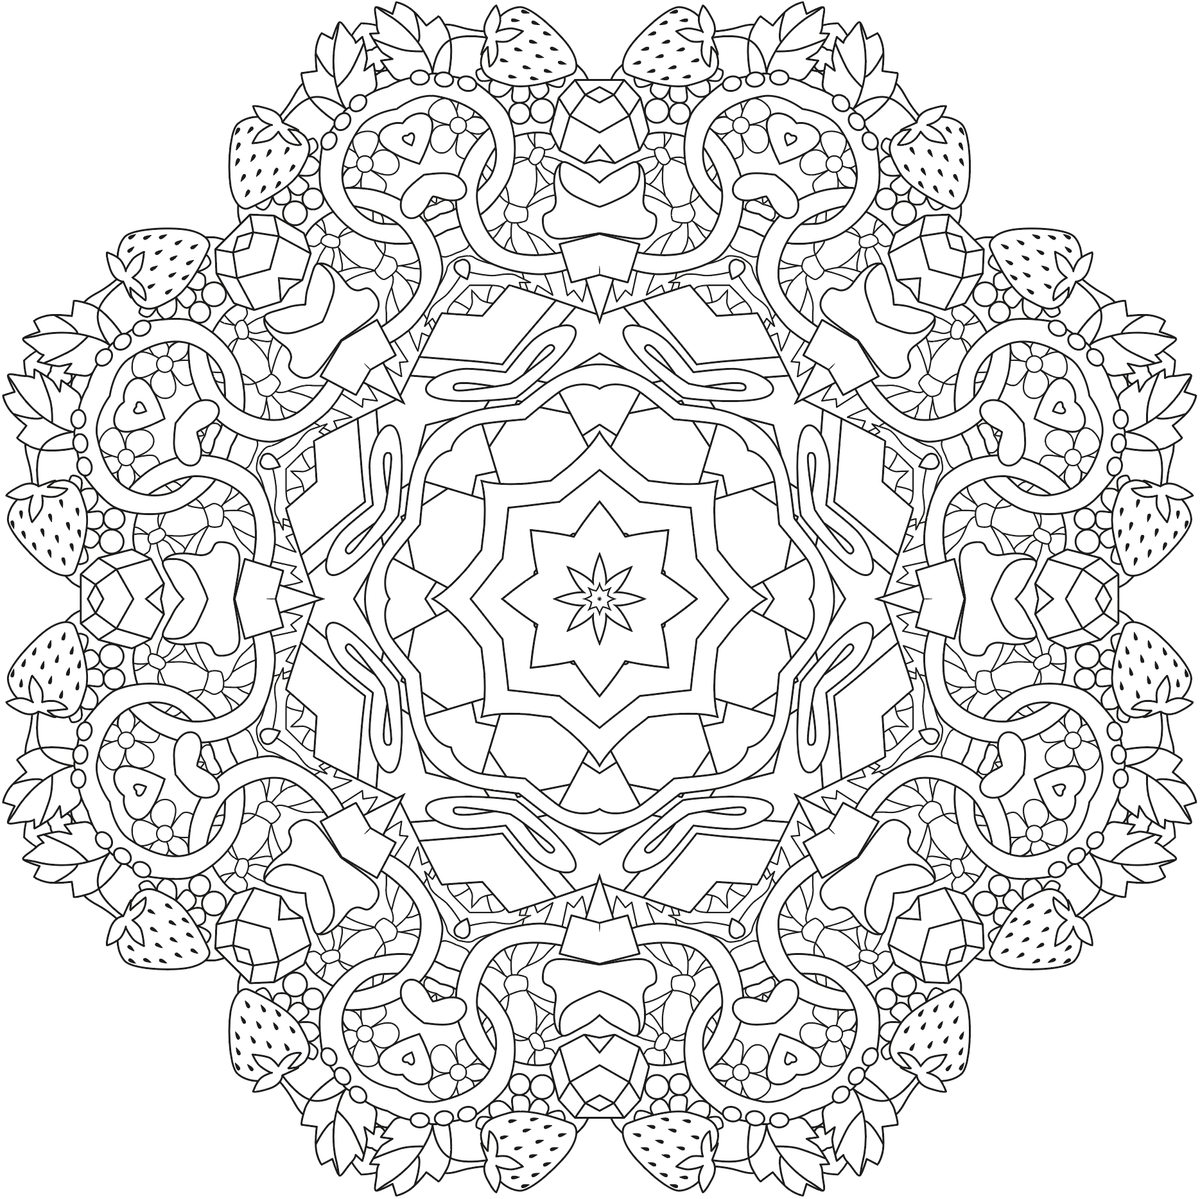 A black and white Color My Strawberry Mandala coloring page by COLOR ME IN.